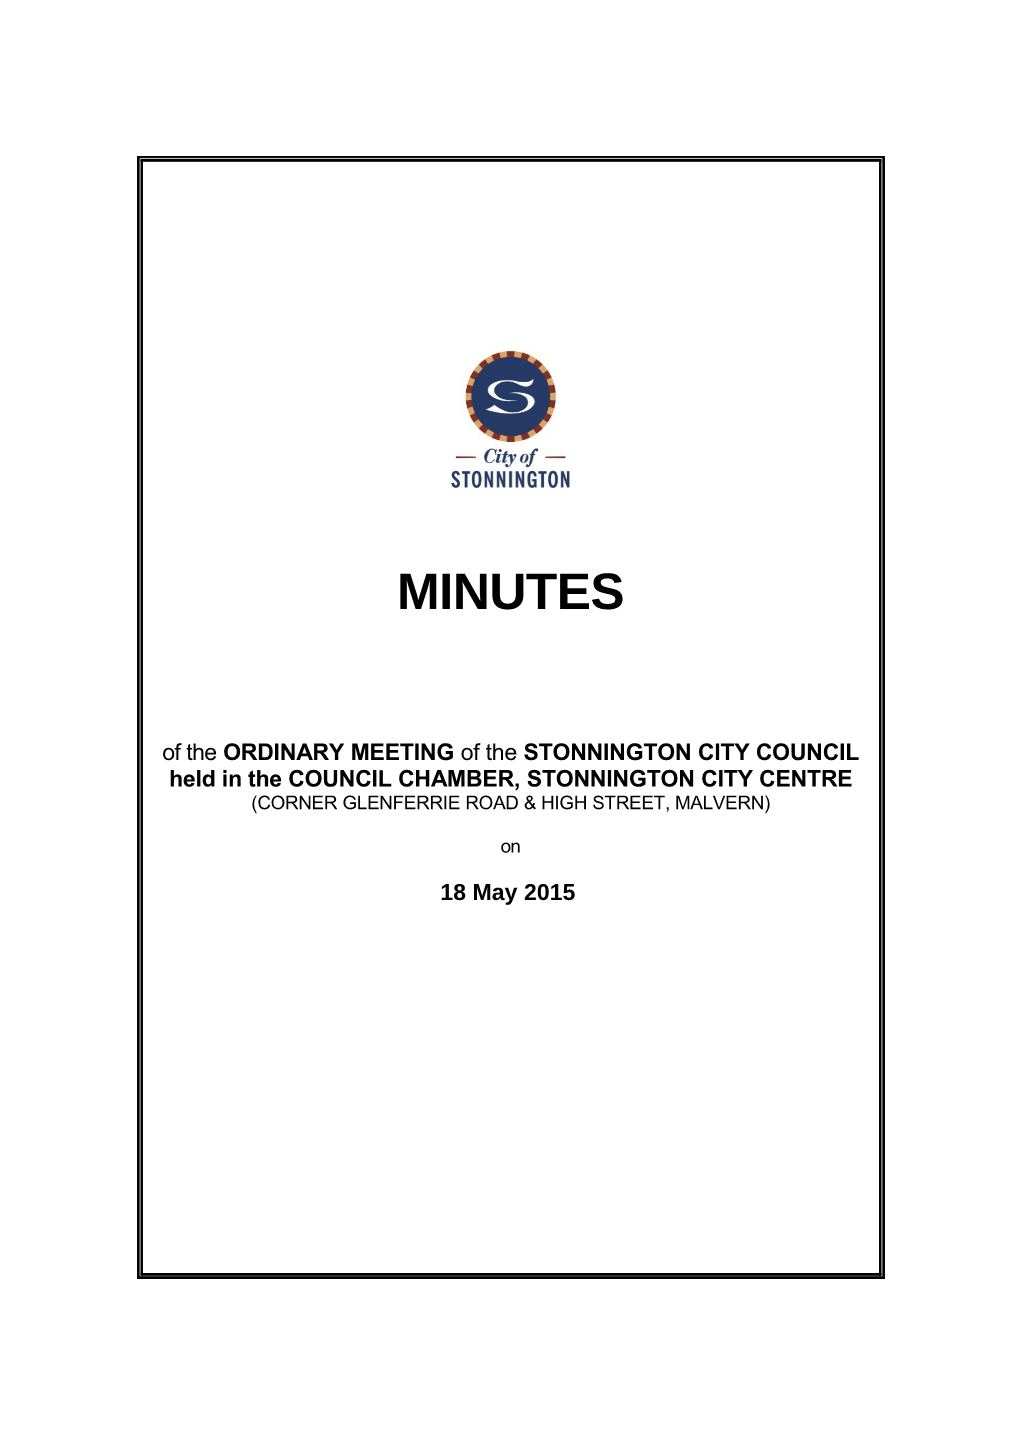 Minutes of Council Meeting - 18 May 2015